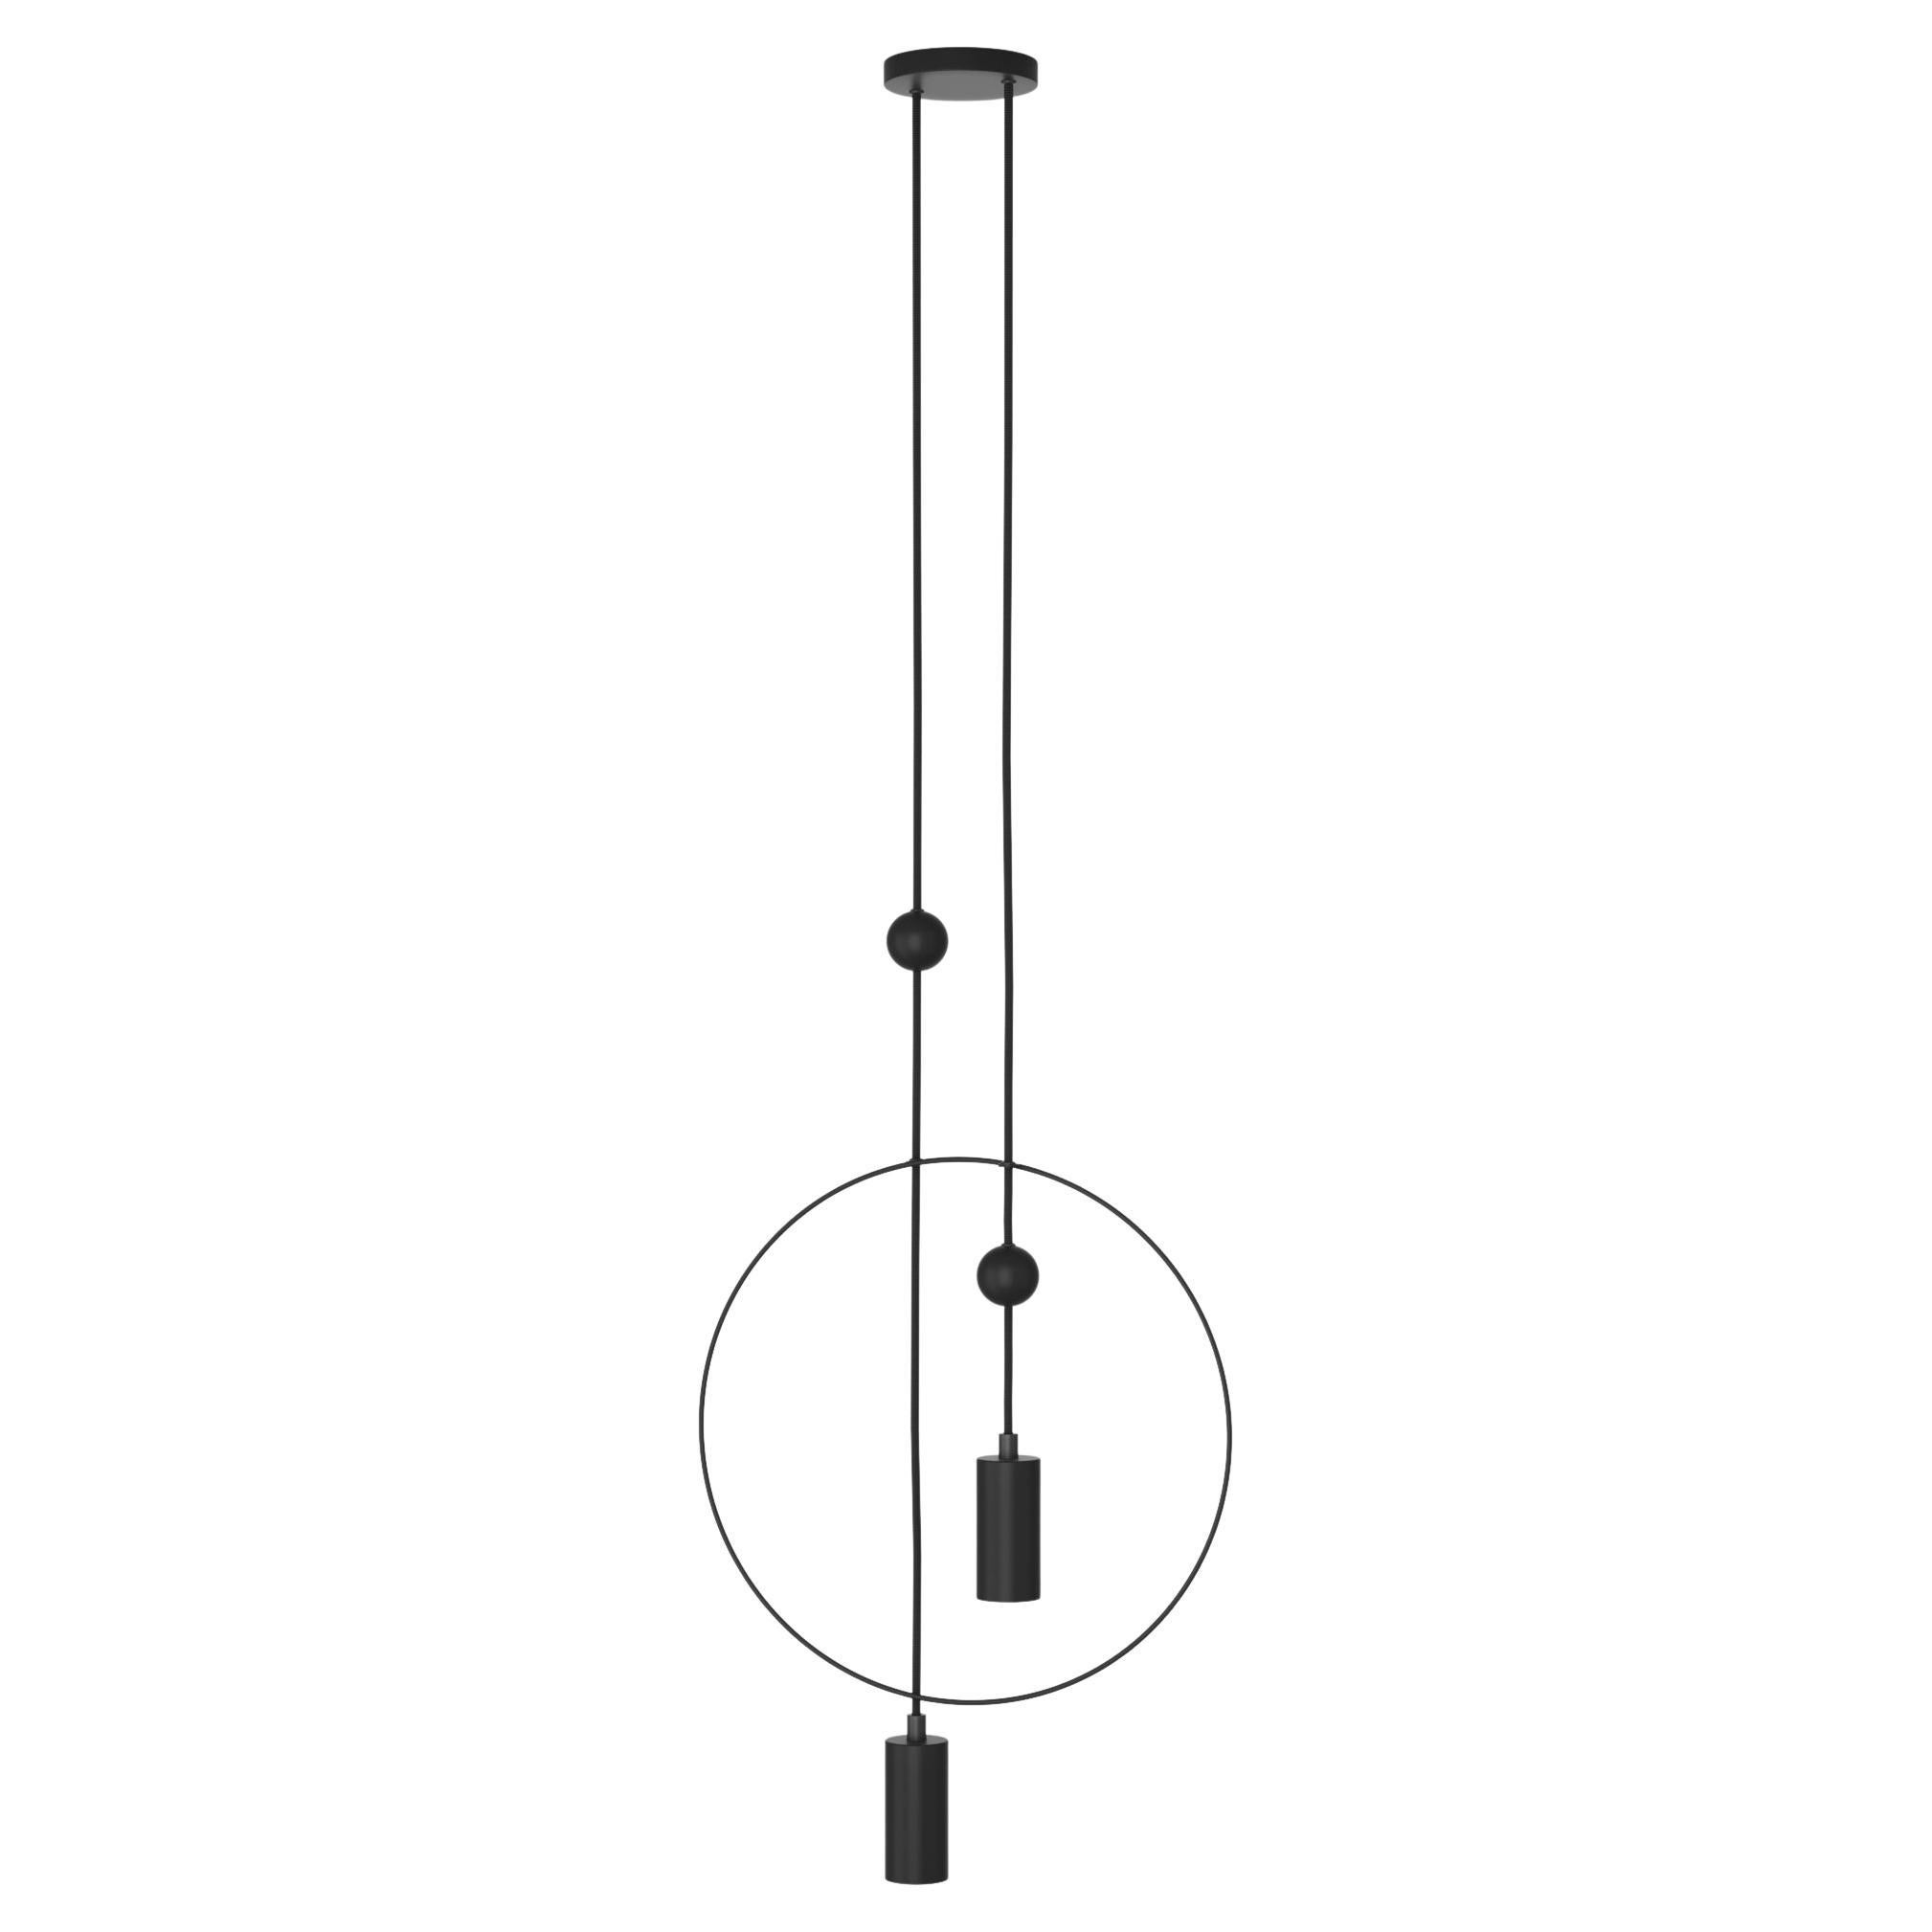 Sunderline 2C (2steel spots)

Category: Lighting
Type: Pendant
Material: steel, textile cable
Overall dimensions: H: 2100 mm / W: 400 mm
Light source: 2 * E14, 110-220V
Available in different colors according to RAL Classic.


Options of